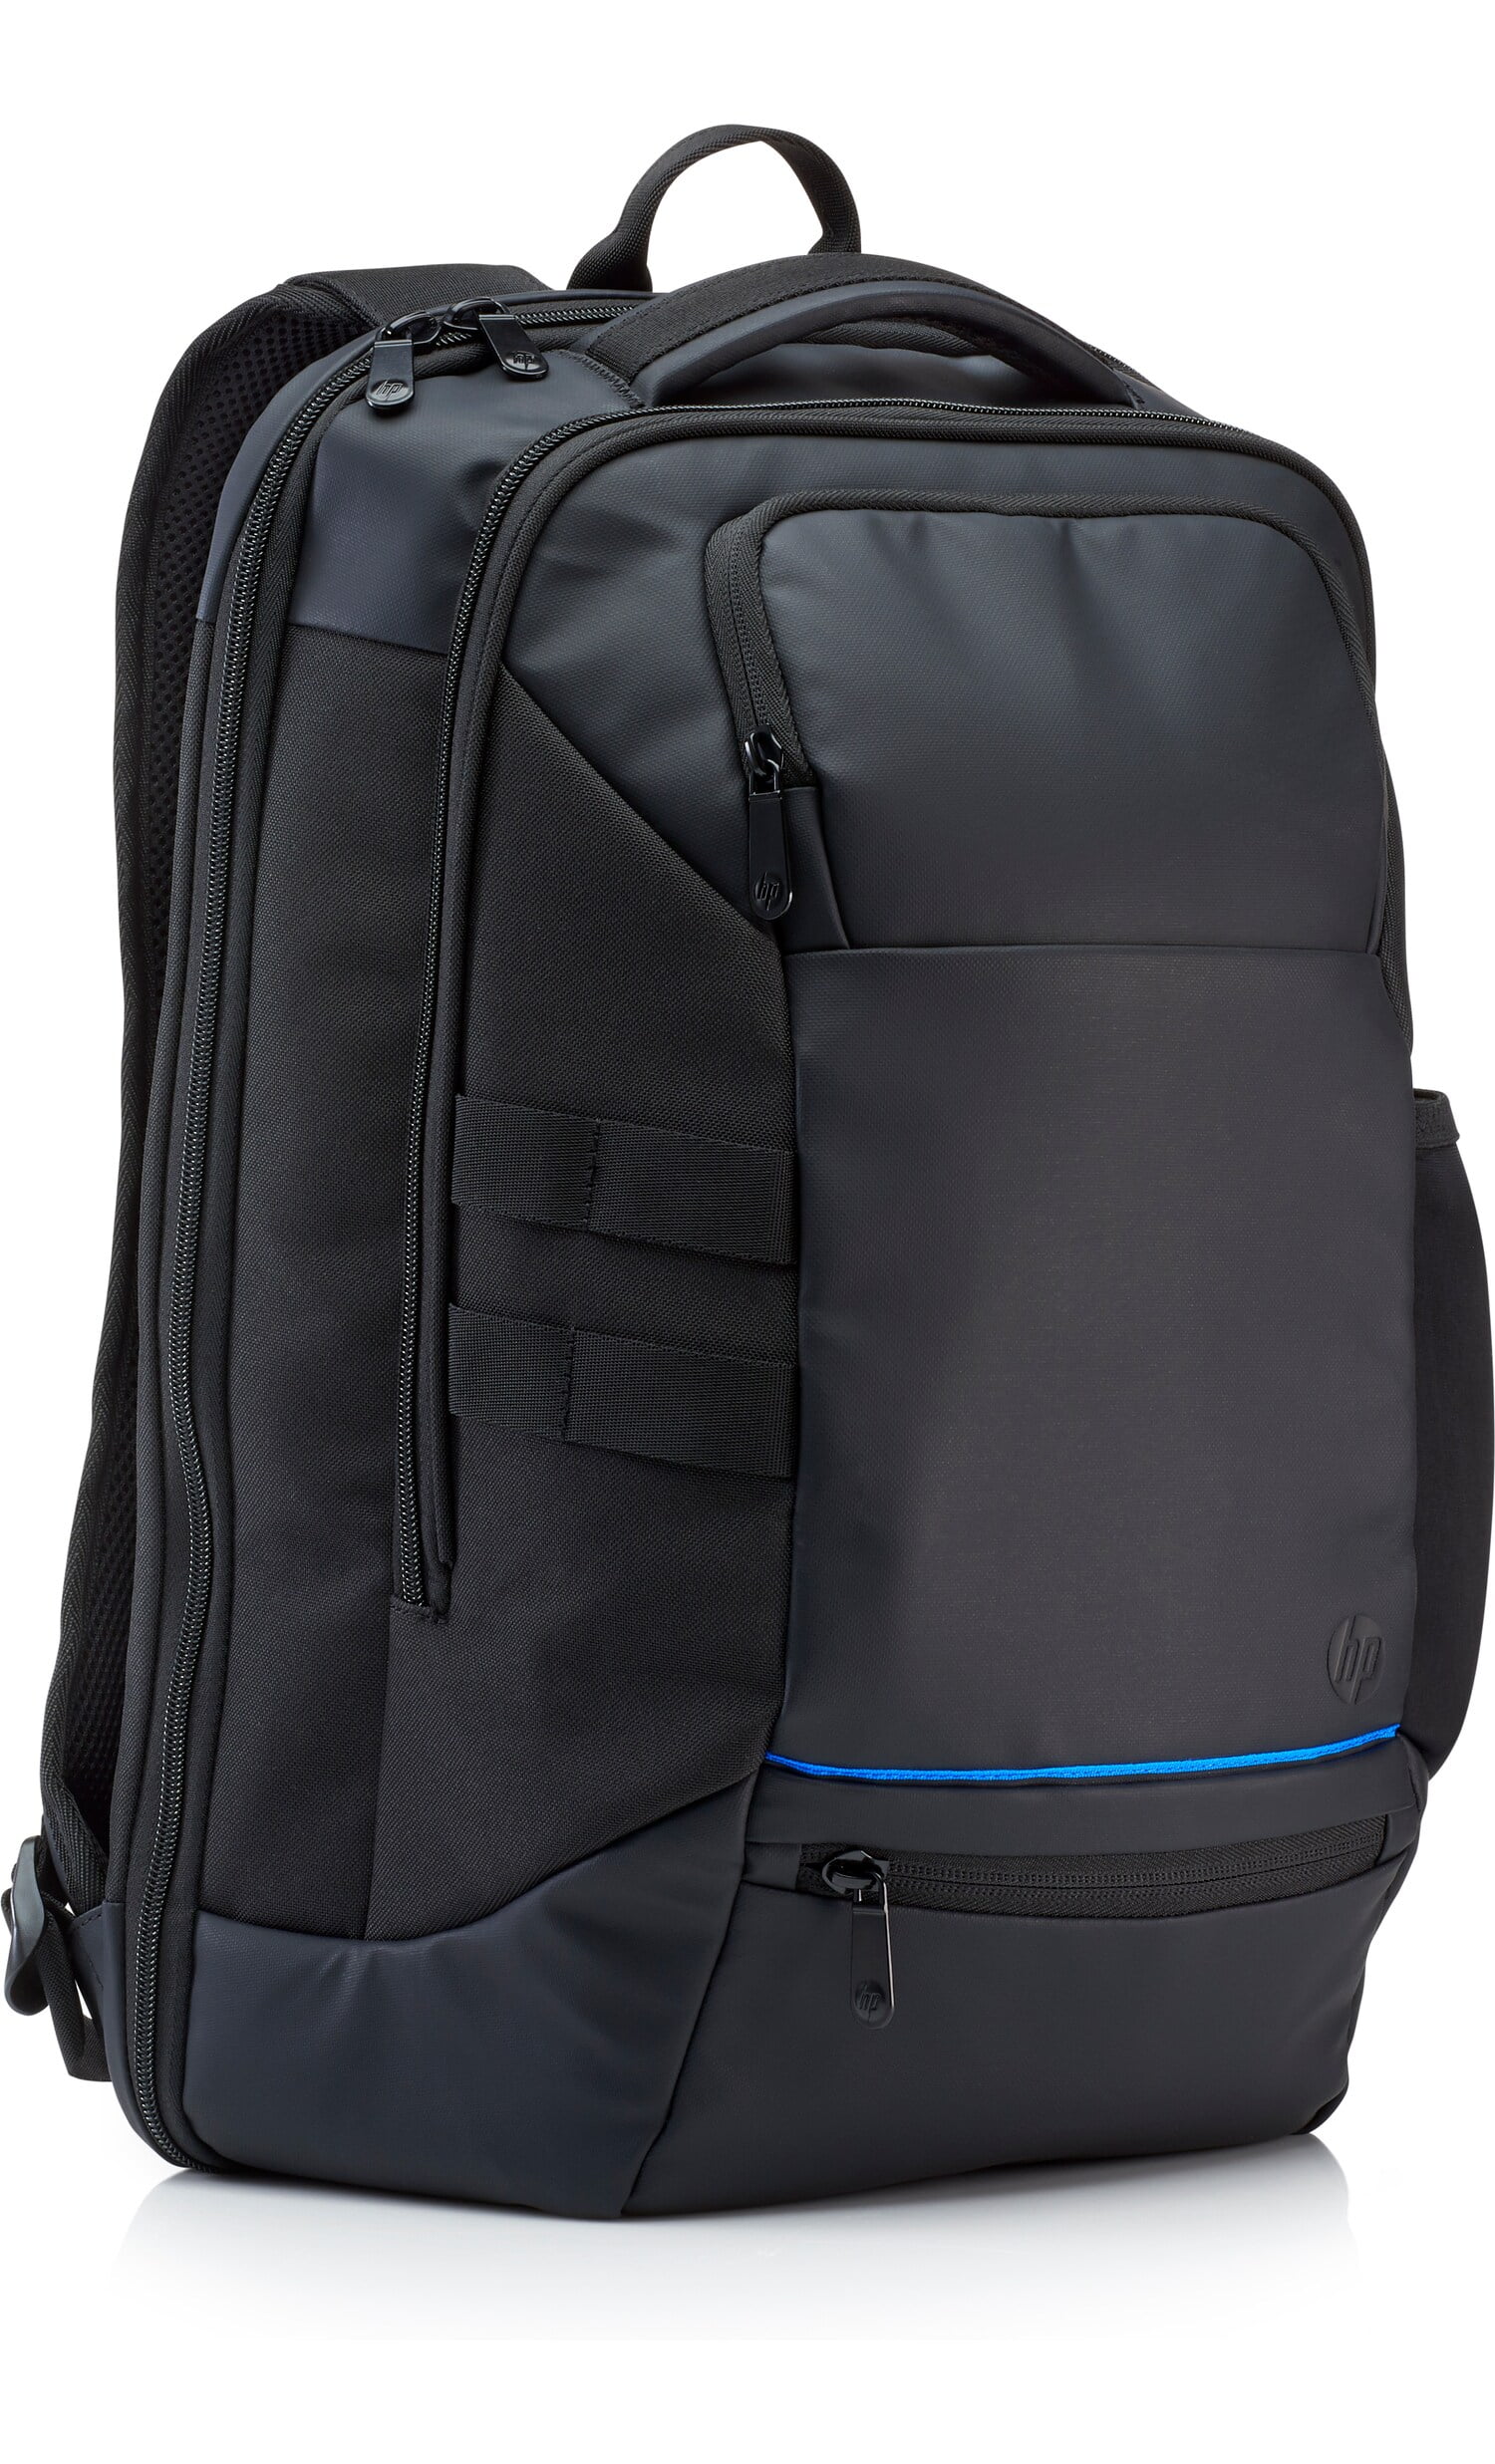 HP Recycled Series 15.6-inch Backpack - Walmart.com